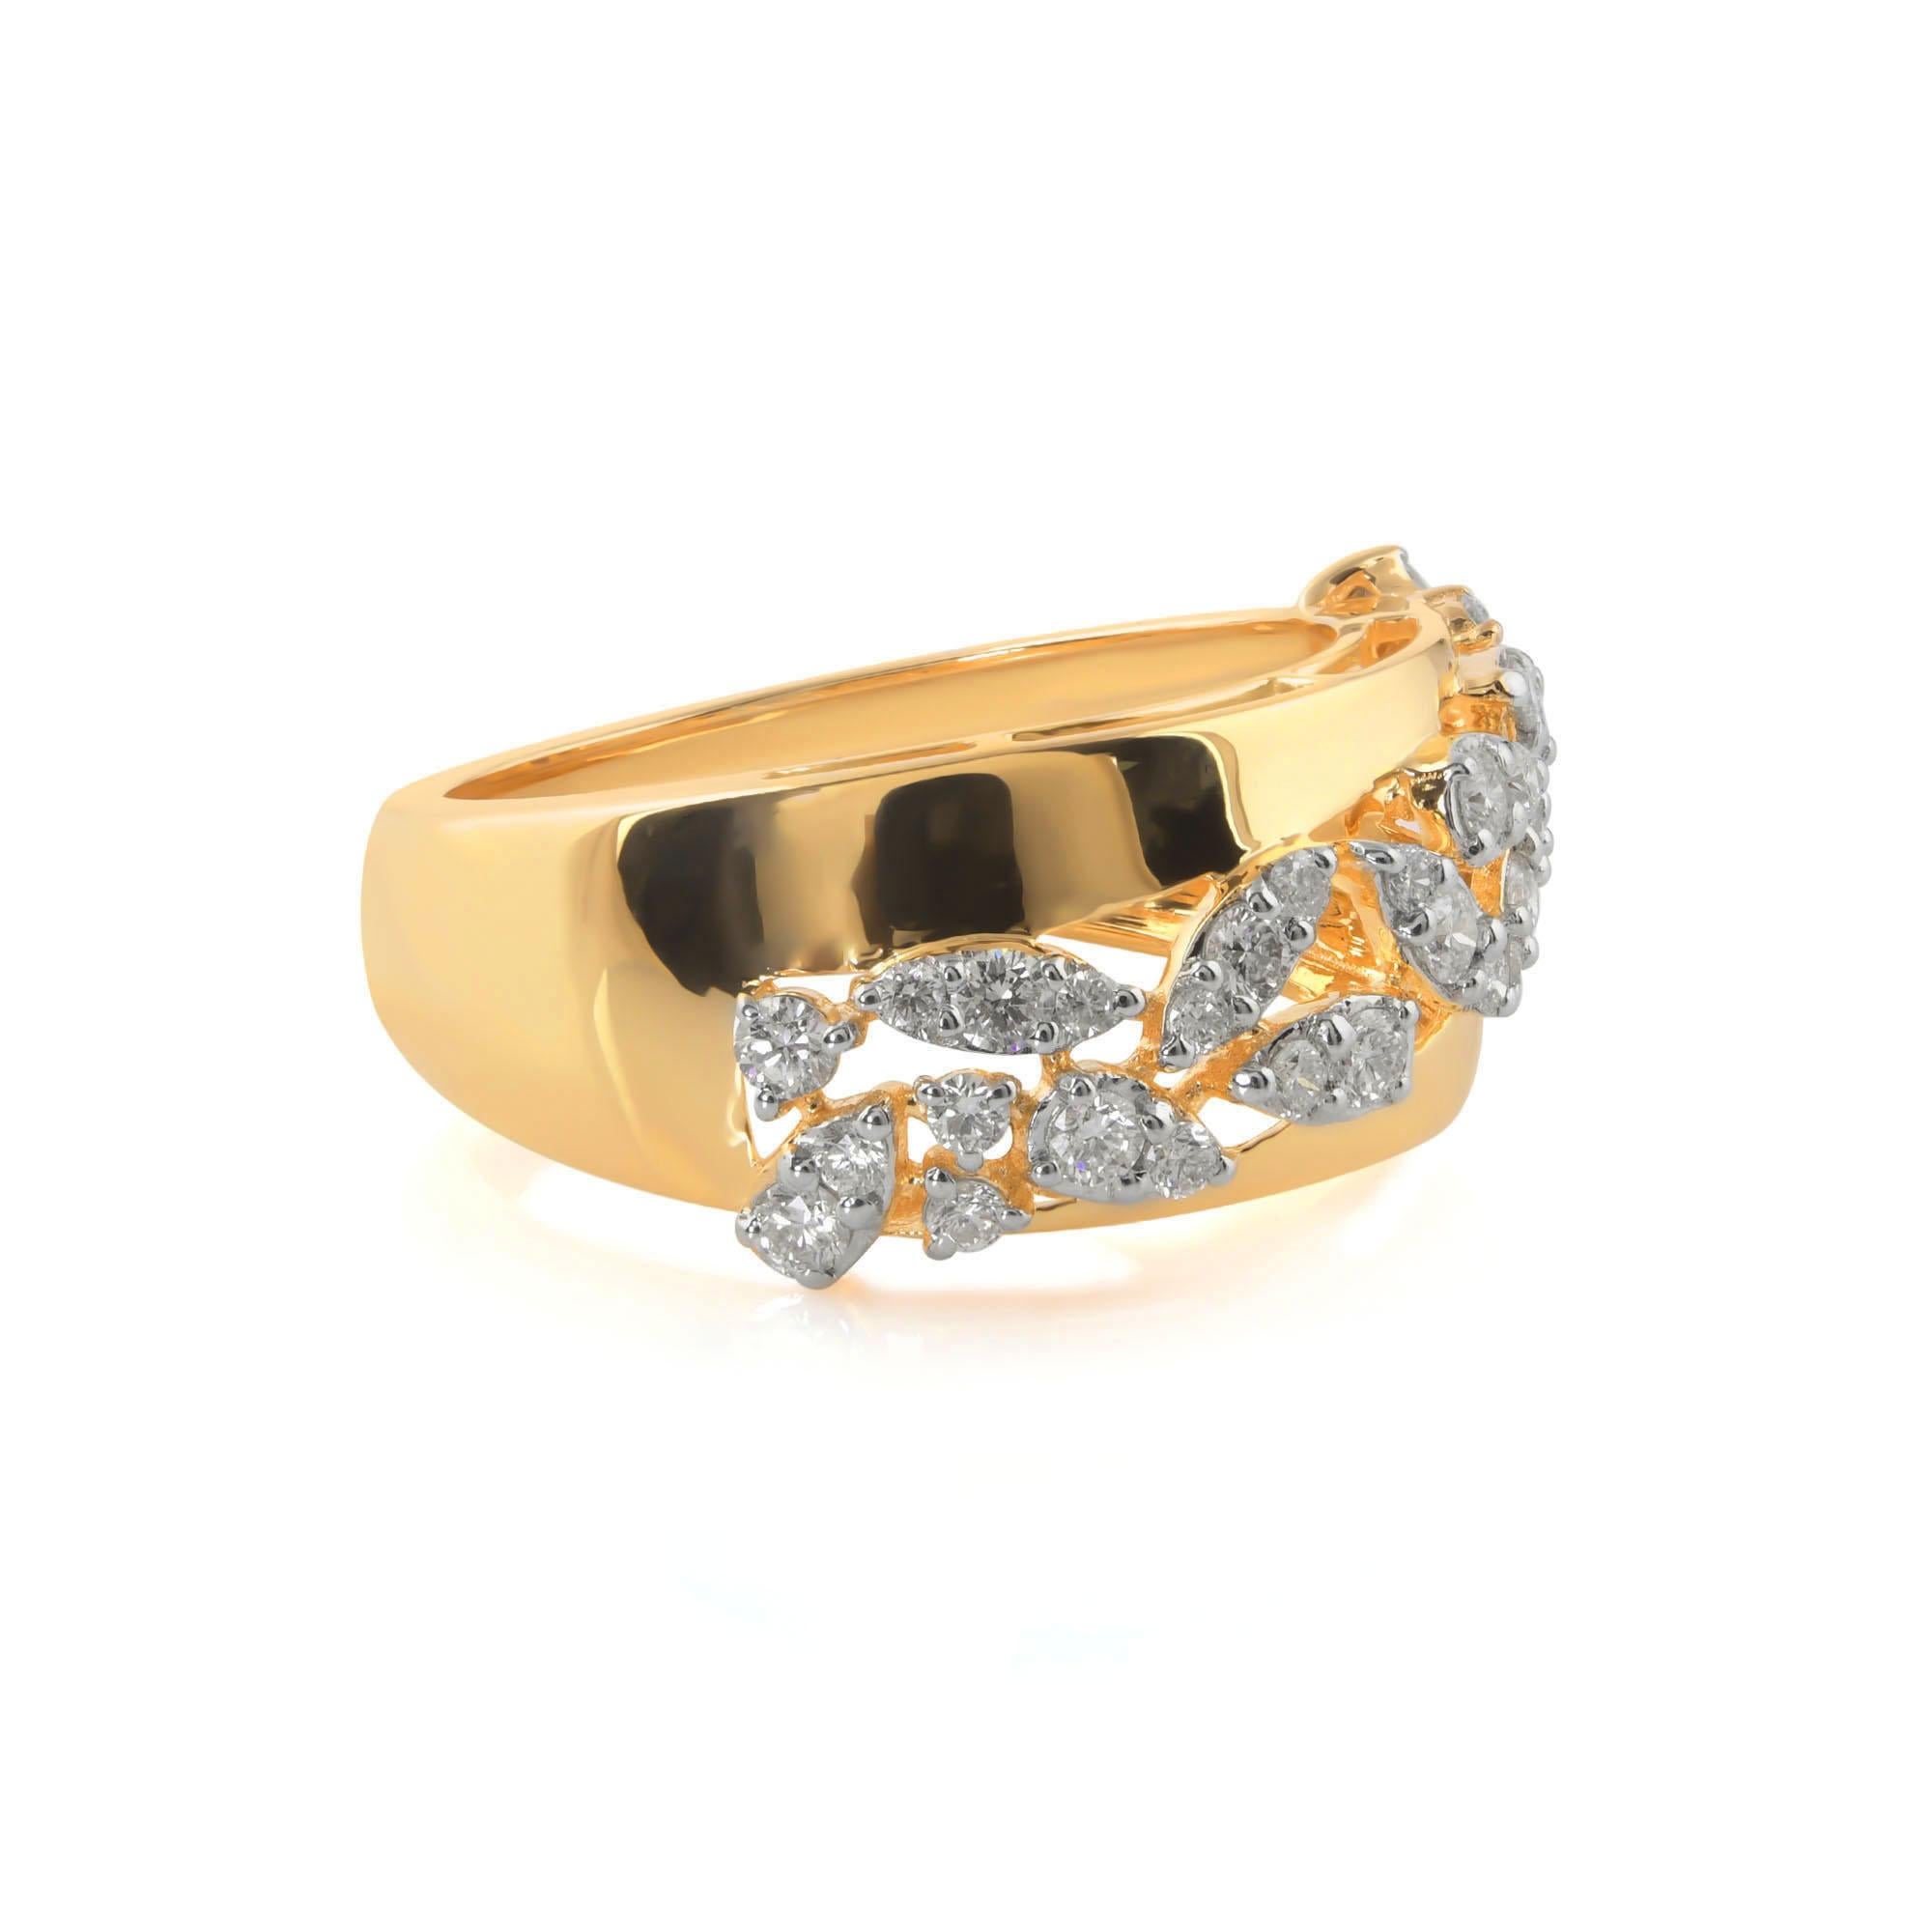 Elevate your style with timeless elegance and luxurious craftsmanship embodied in this stunning SI clarity, HI color diamond dome ring crafted in 14k white and yellow gold. This exquisite piece of jewelry seamlessly blends classic sophistication